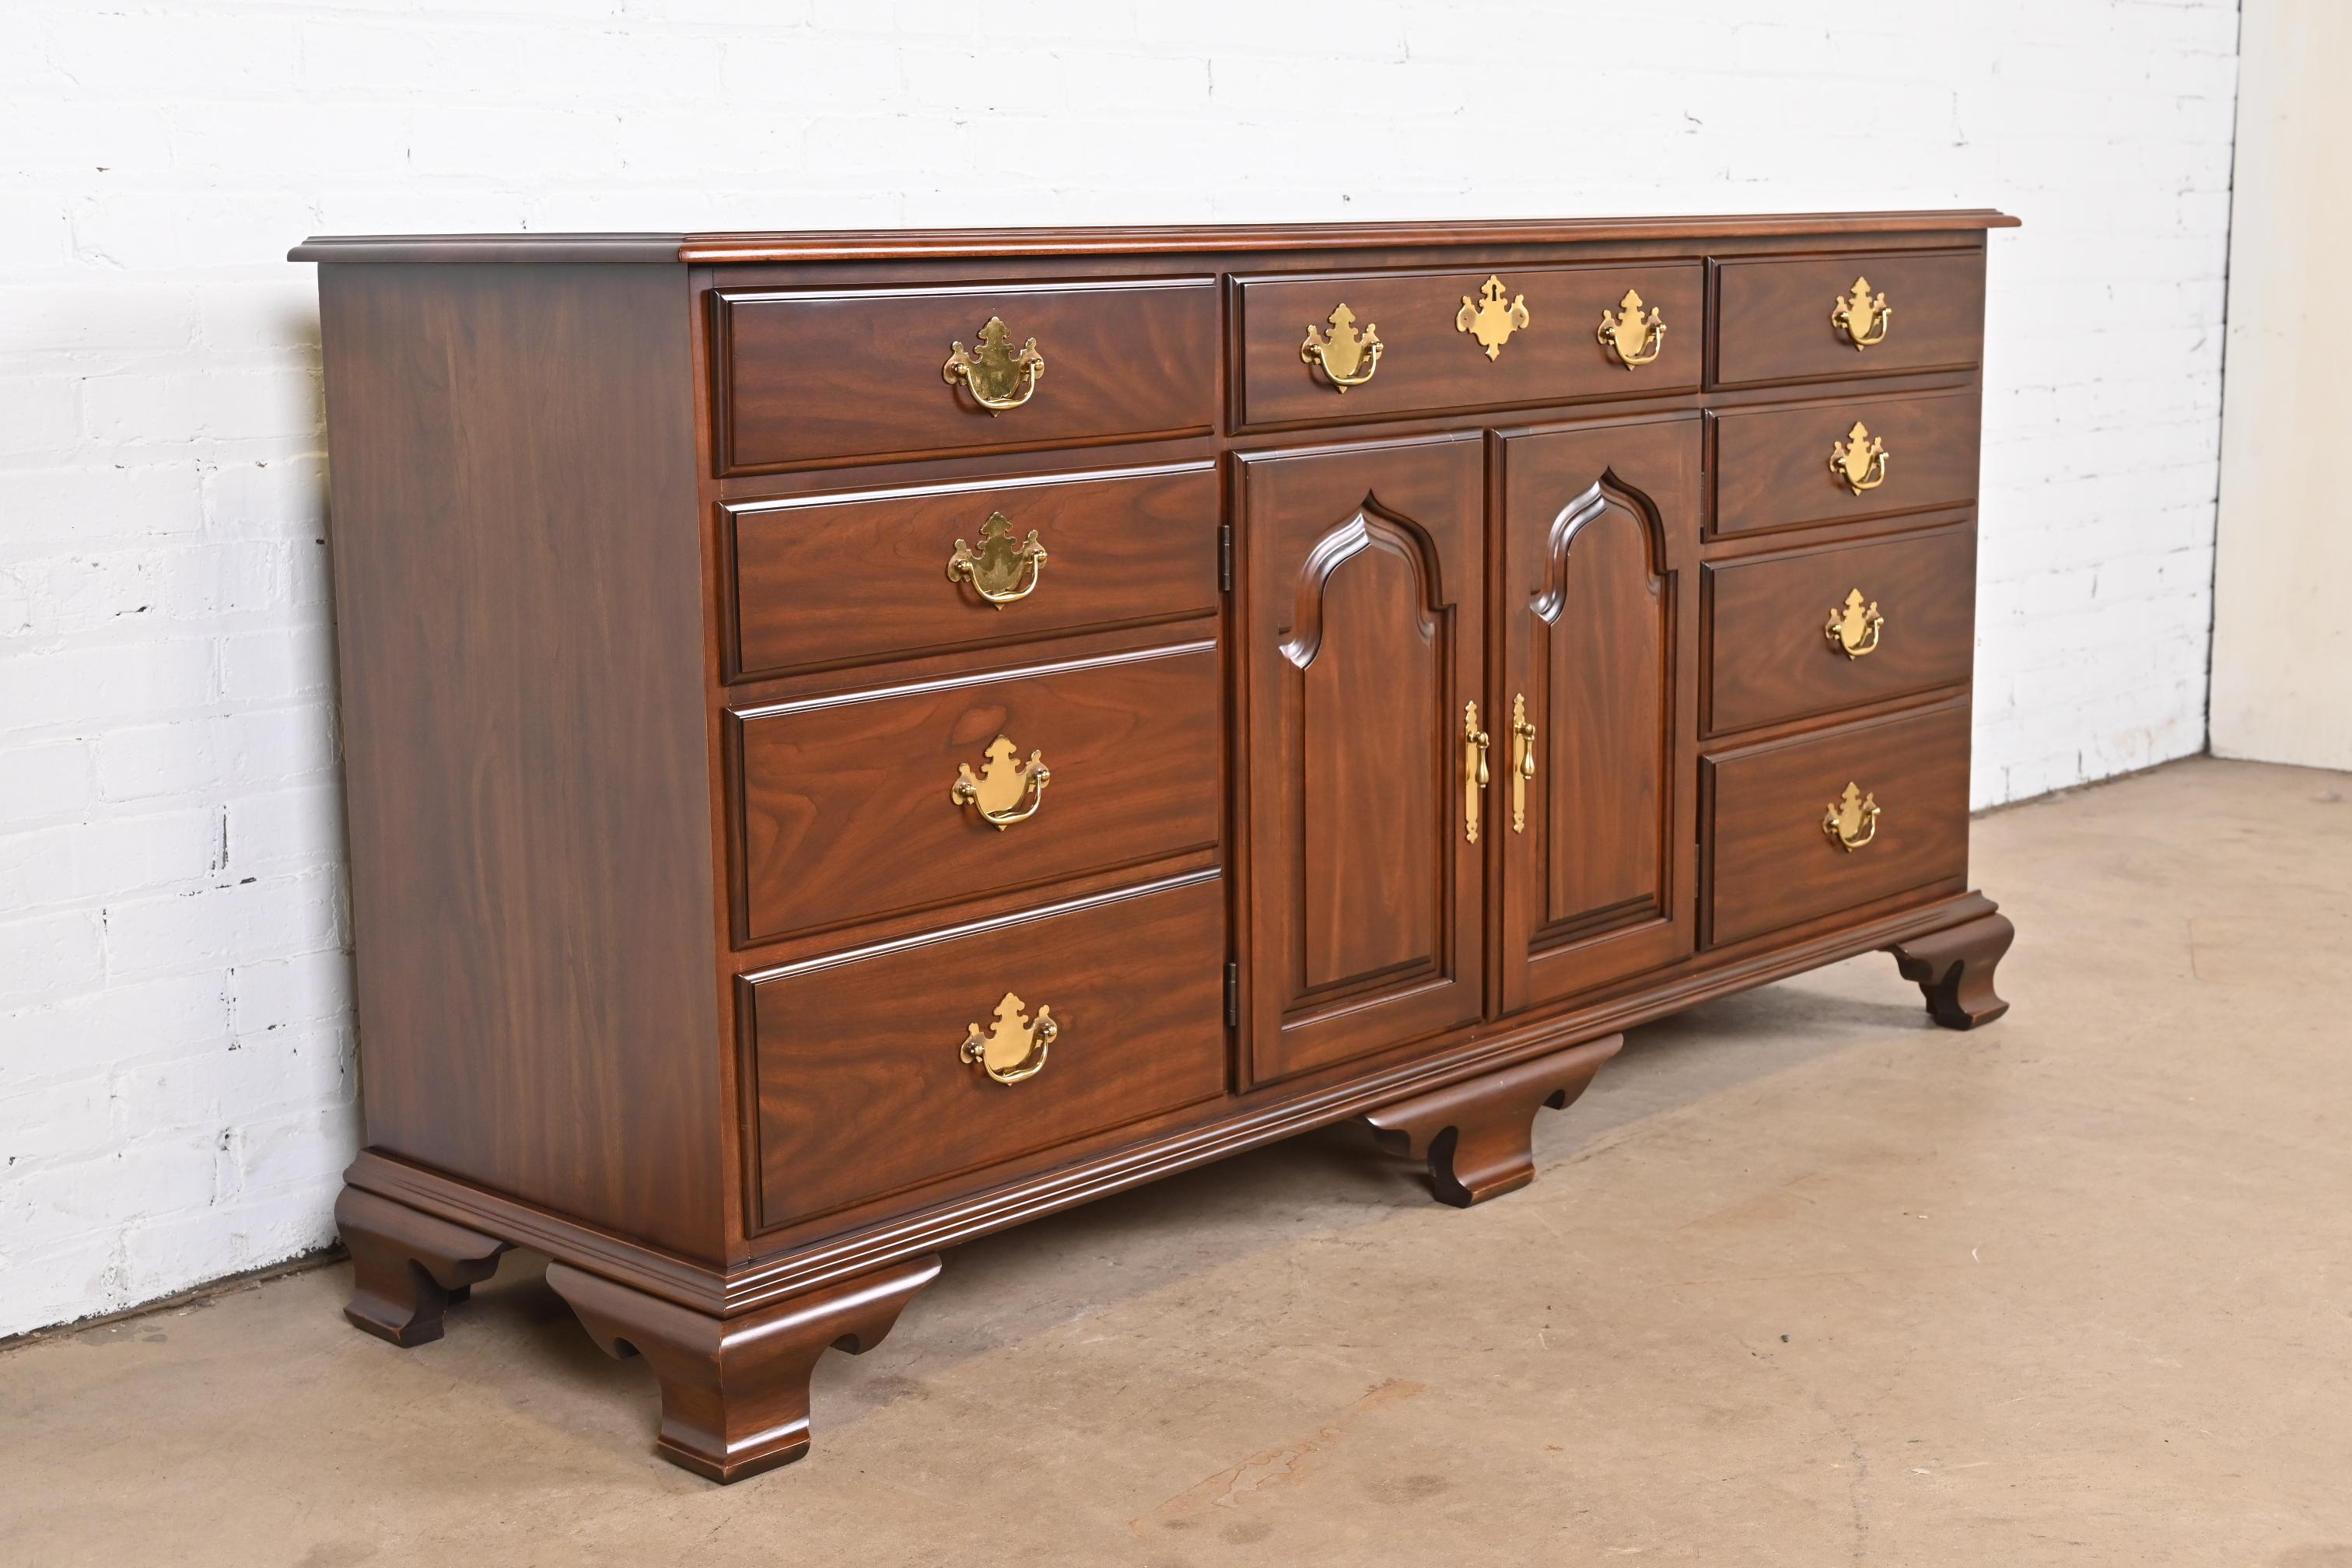 American Harden Furniture Georgian Solid Cherry Wood Long Dresser, Newly Restored For Sale